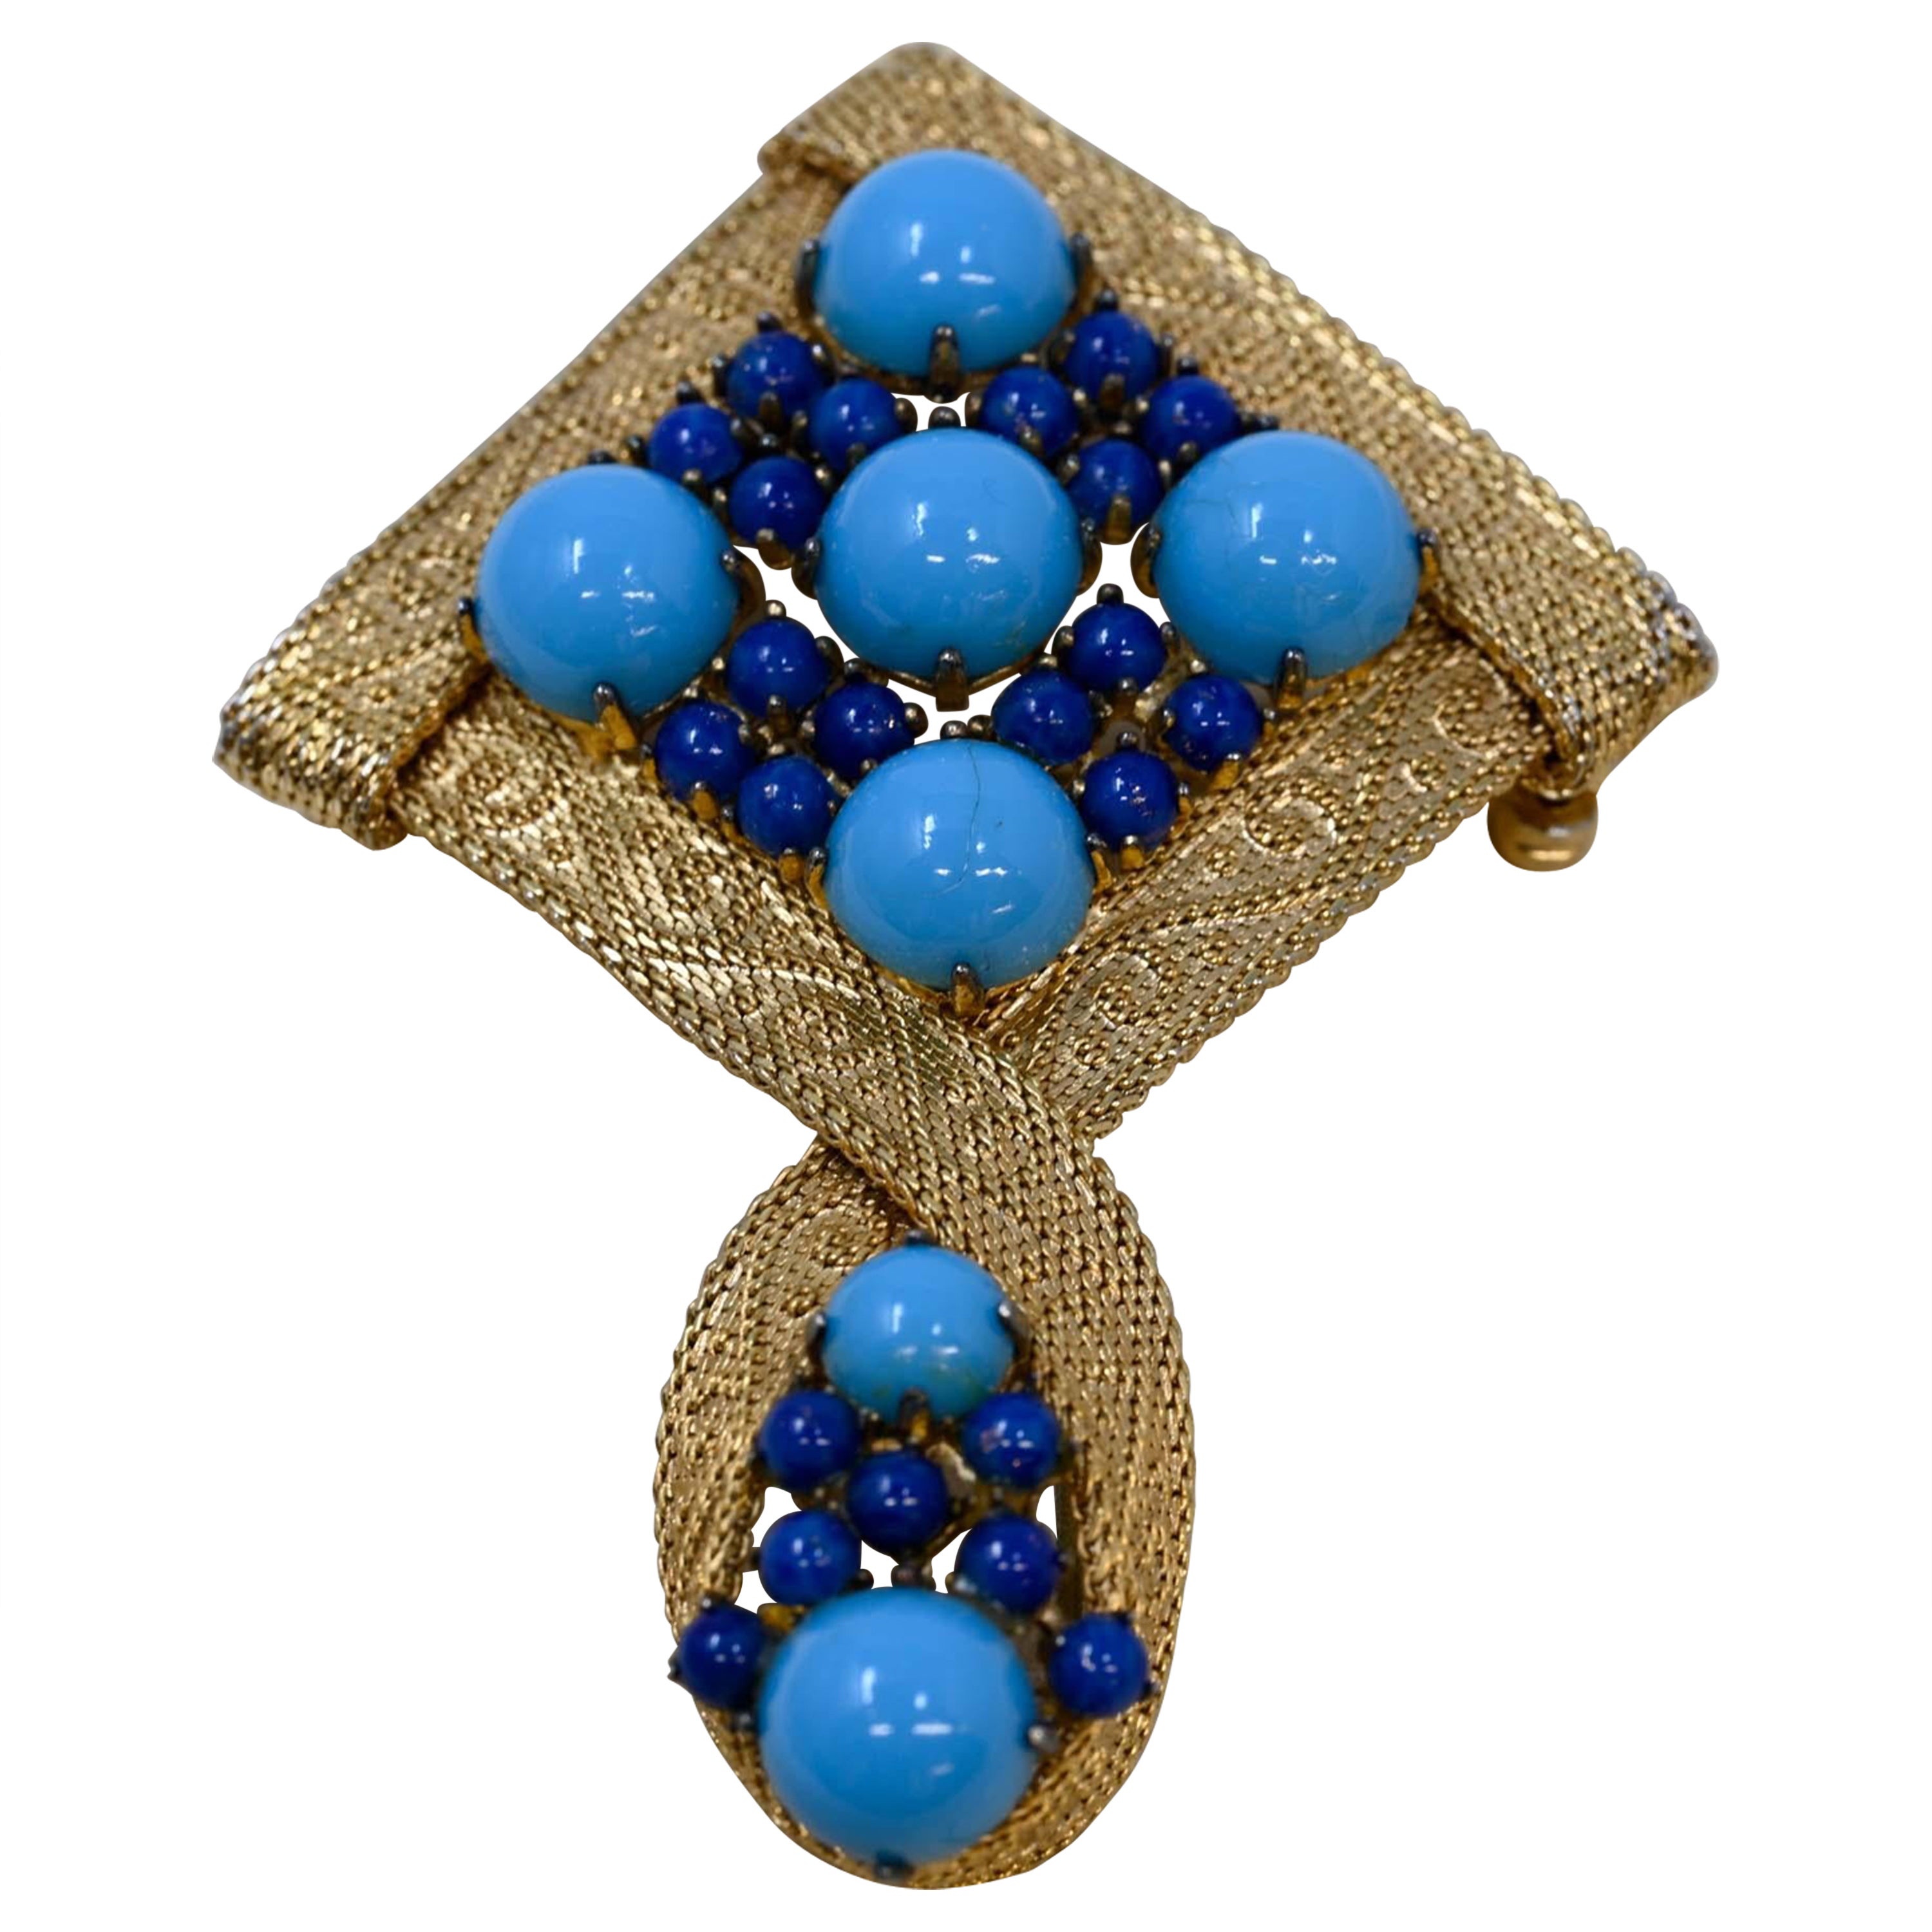 Christian Dior 1962 Blue Cabochon Brooch For Sale